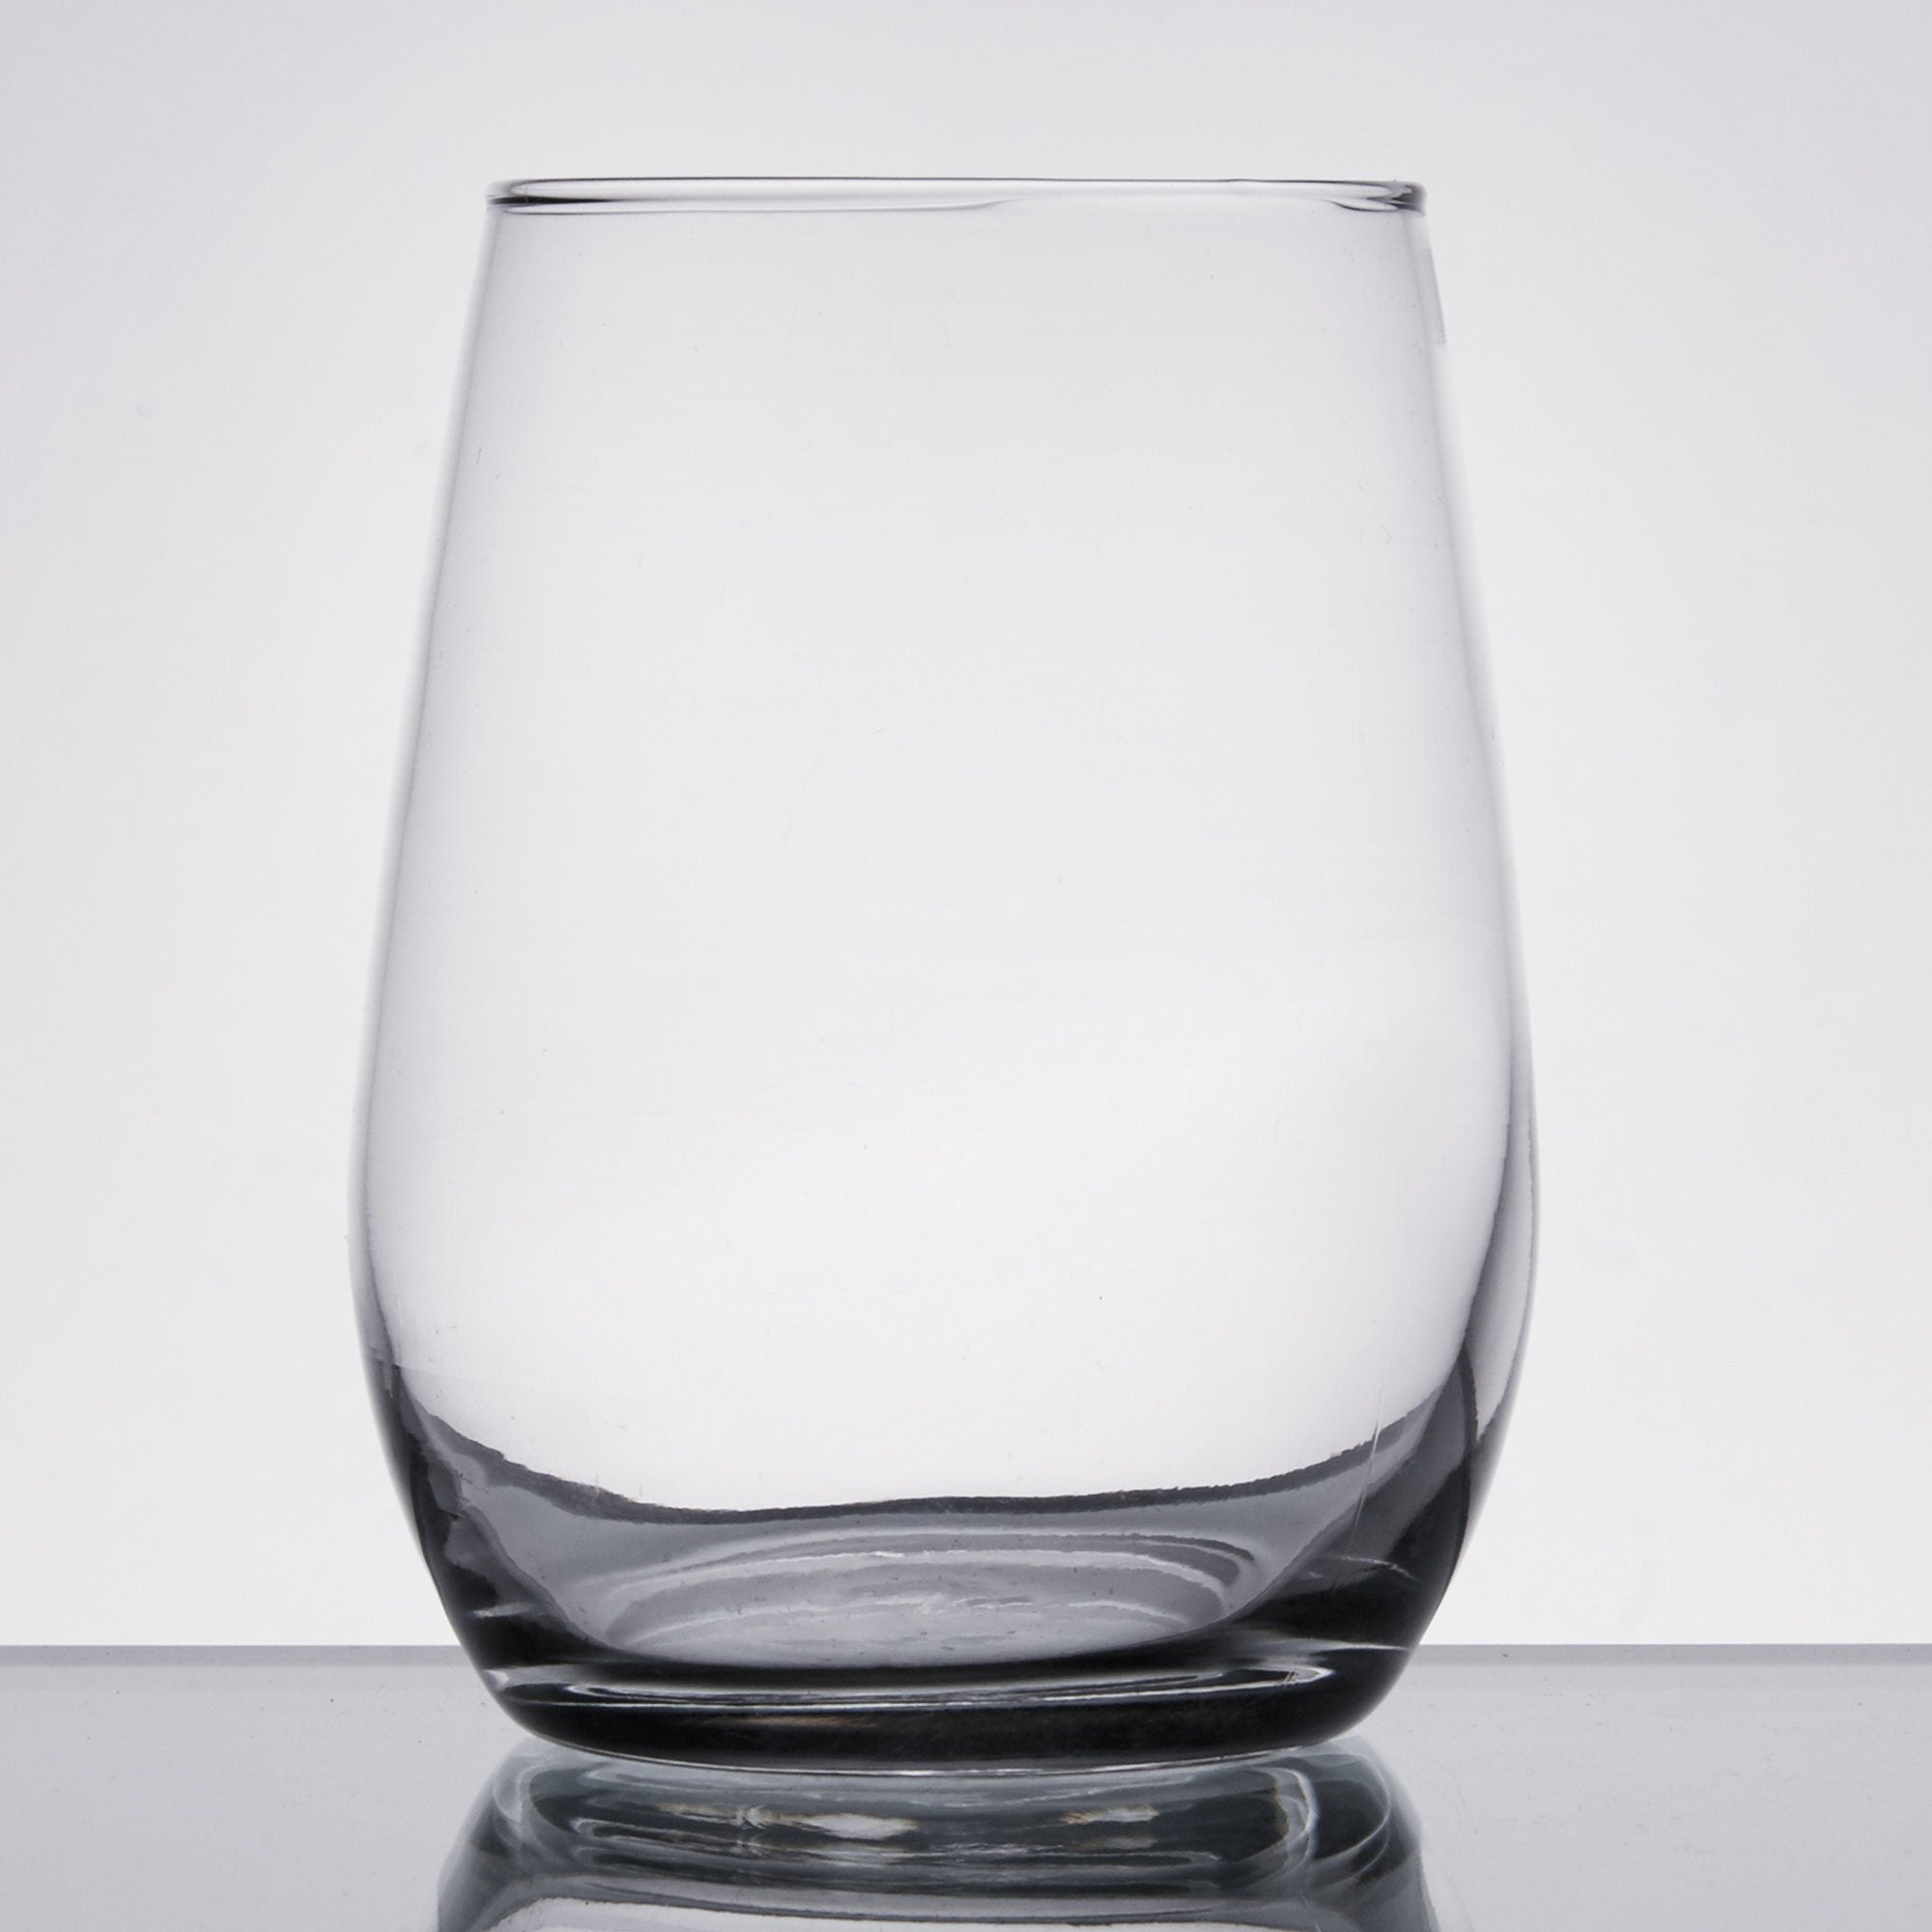 6 OZ MINI TESTER Libbey Stemless Wine Drinking Glasses/Glass  260/Set of 6/Glassware Cocktail Bar Party: Wine Glasses